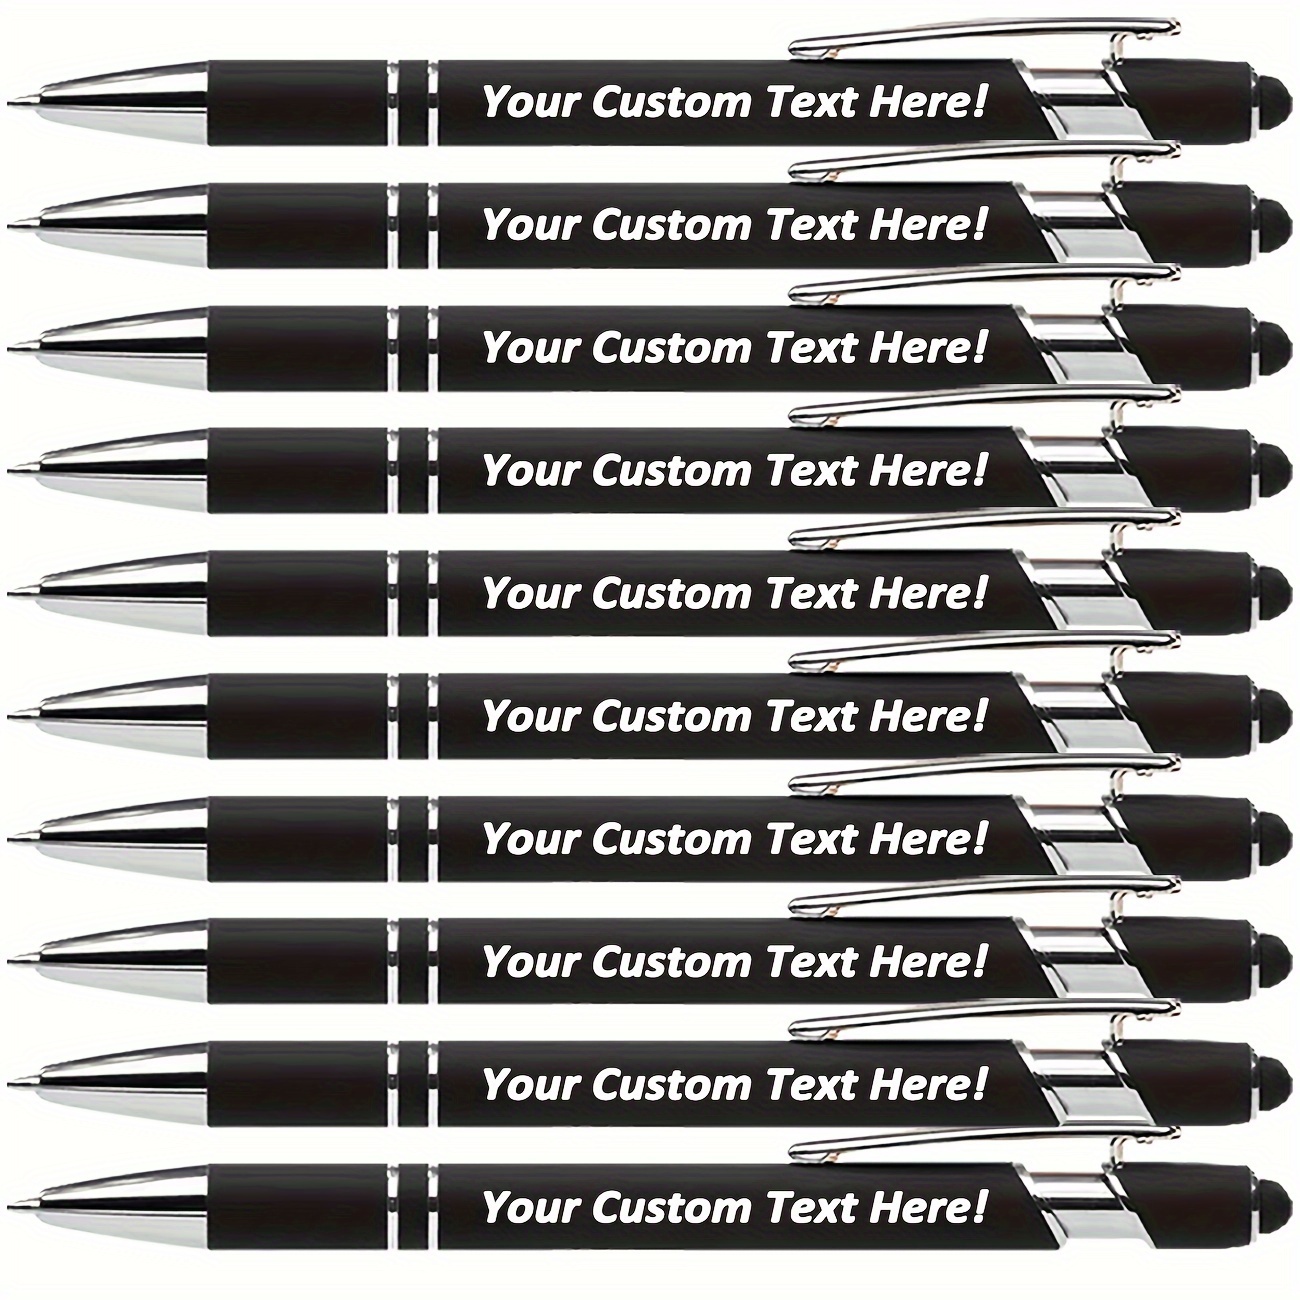 

10pcs Ballpoint Pens, Personalized Custom Pens, Customize The Text You Want, Writing Smoothly, With Touch Screen Compatibility, Ideal For Gifts. (black Ink)